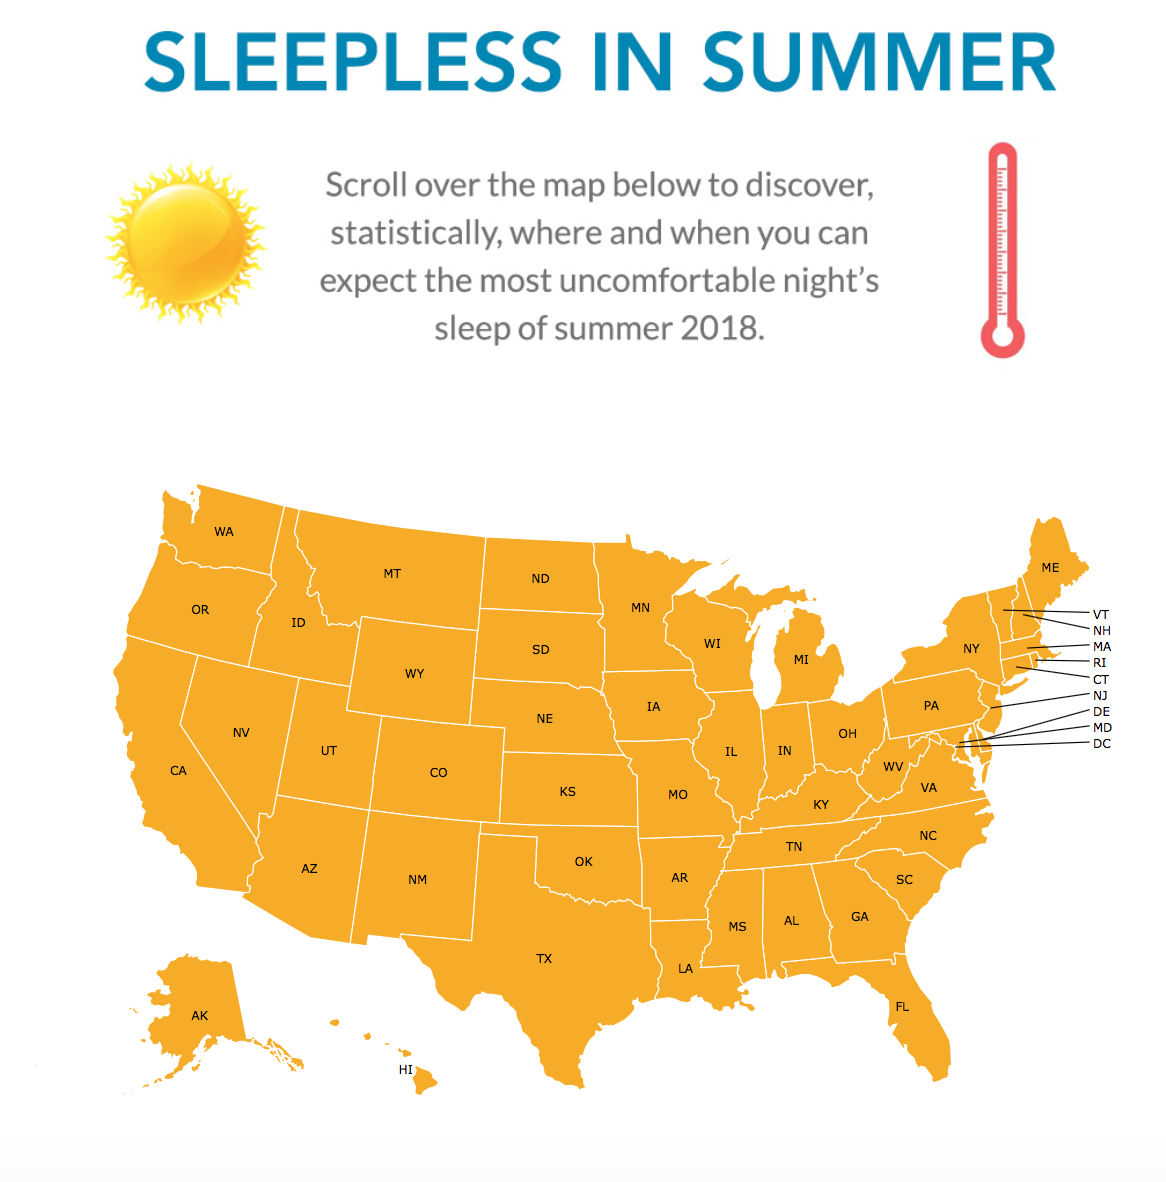 Which States Sleep The Most Uncomfortably In Summer?